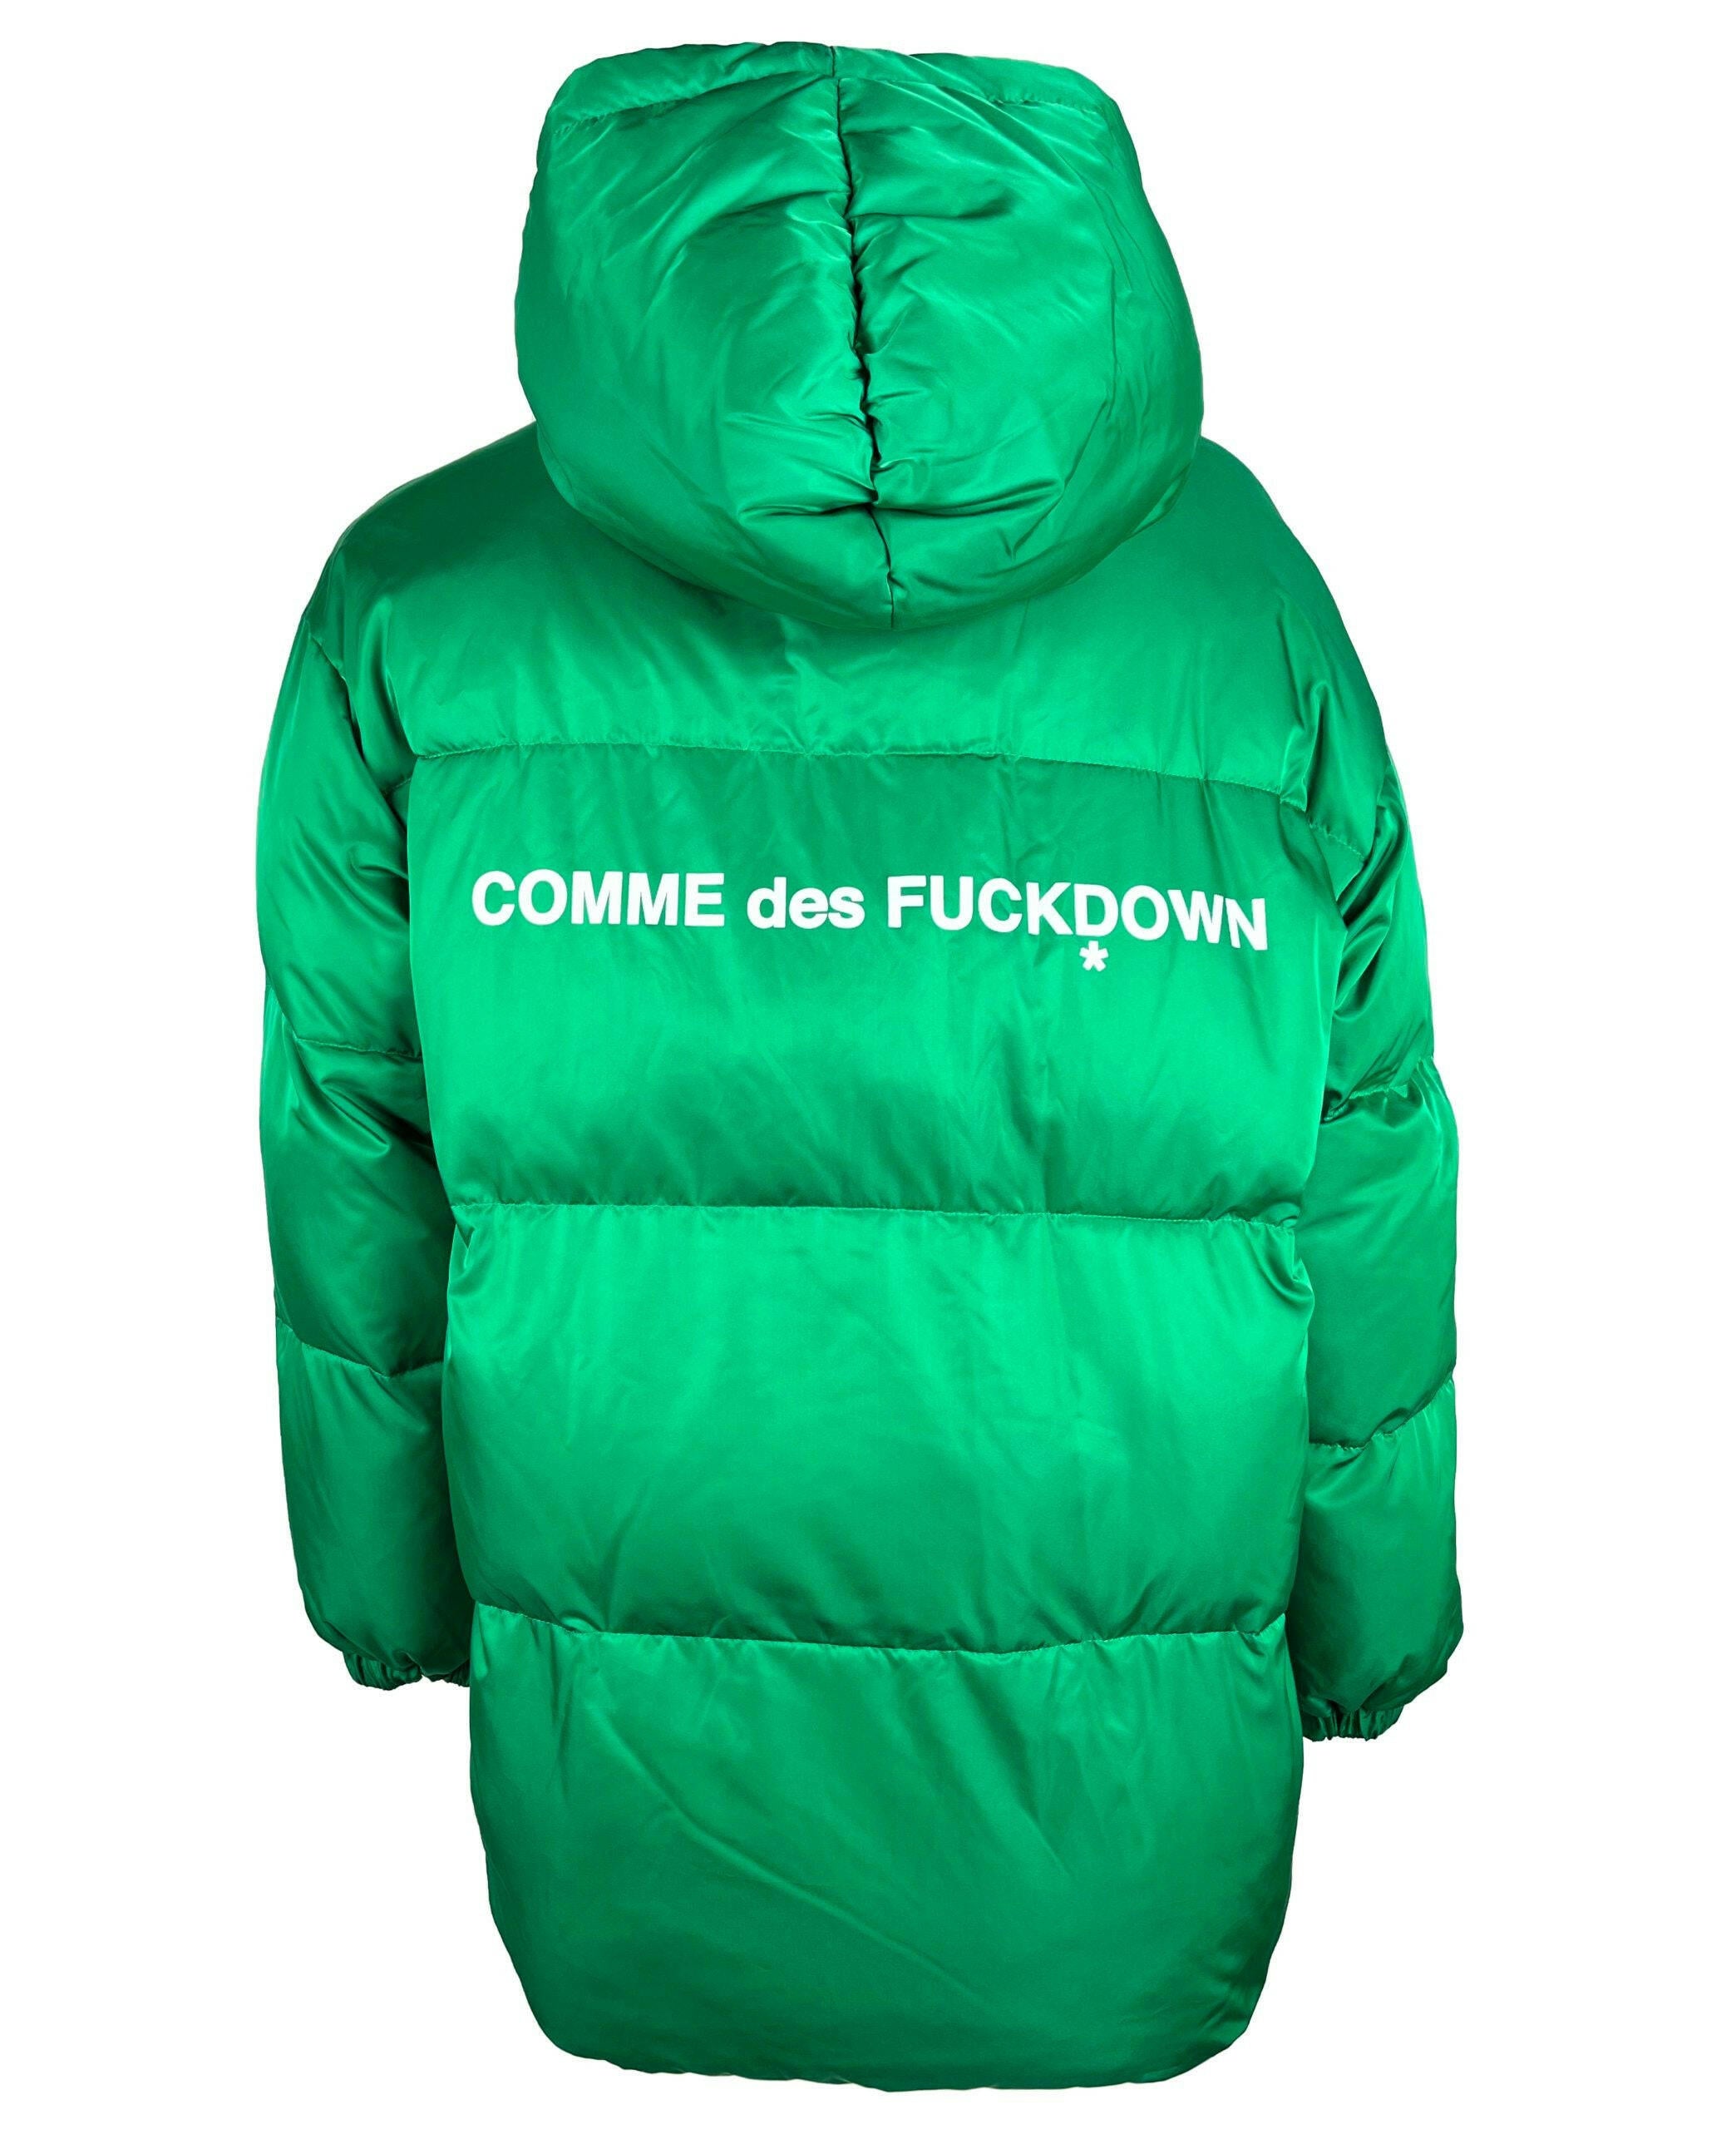 Comme Des Fuckdown Green Polyester Jackets & Coat - GENUINE AUTHENTIC BRAND LLC  